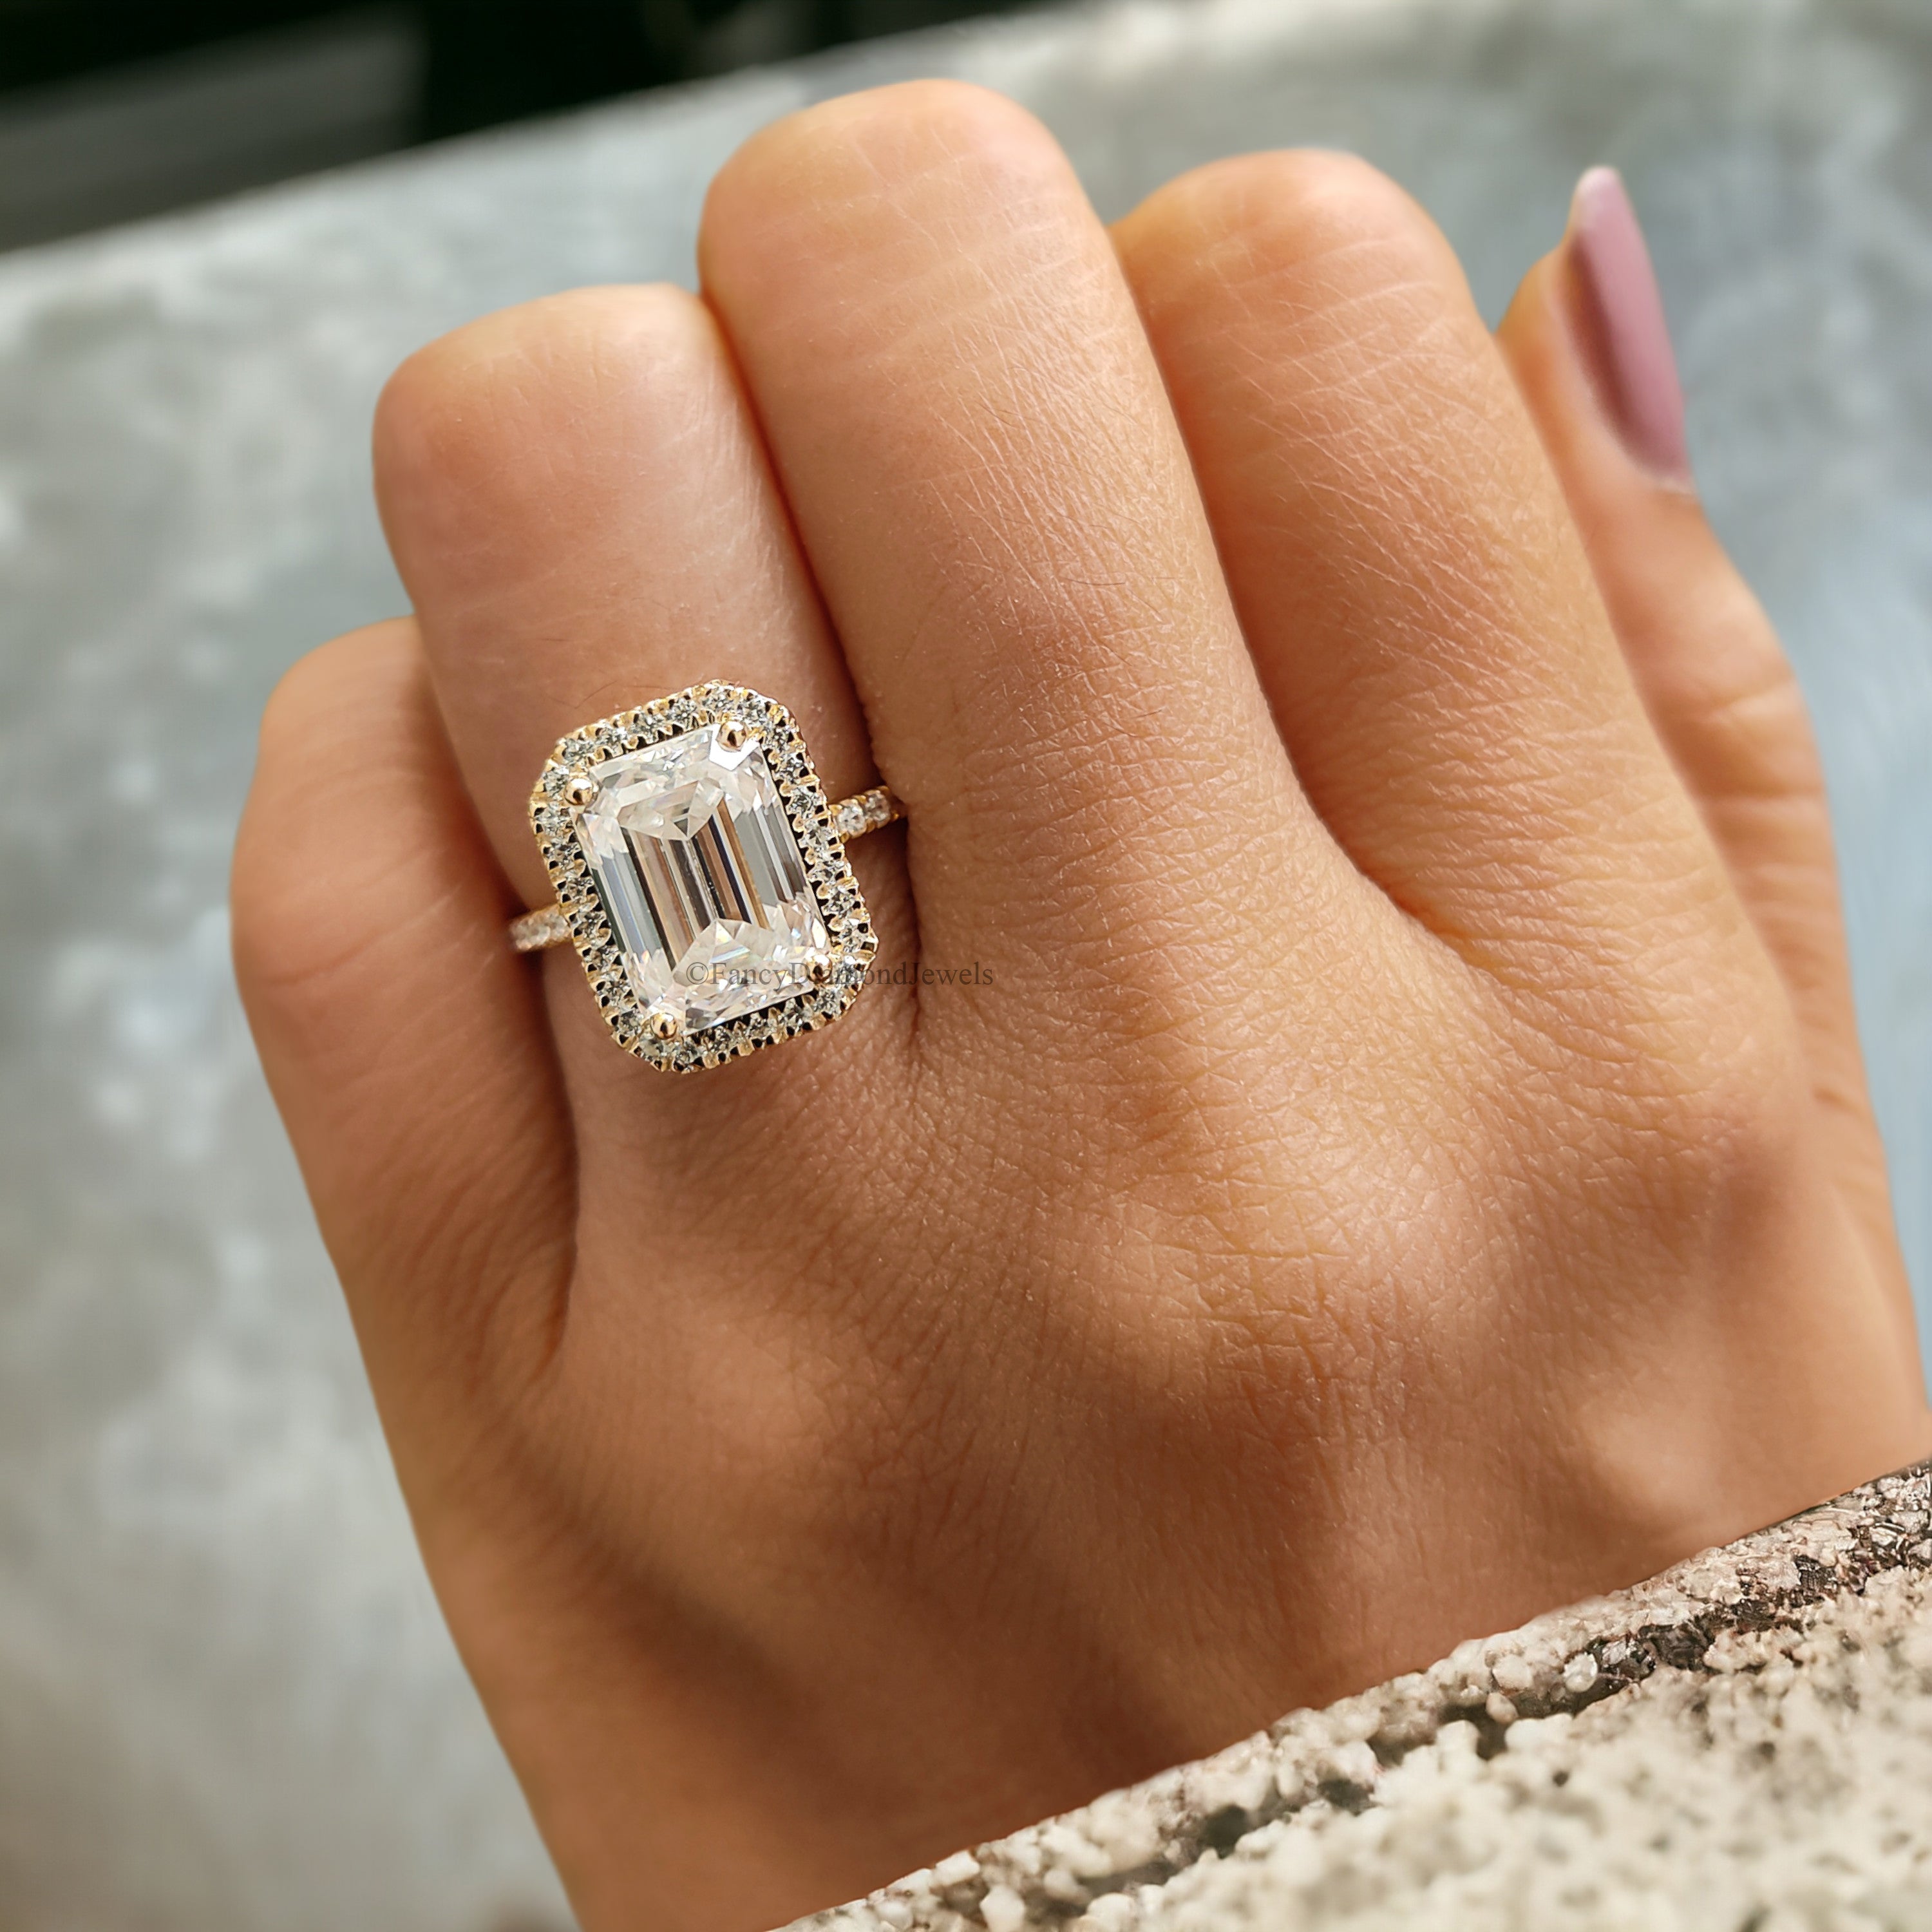 Emerald Cut Colorless Moissanite Engagement Ring 3.00 Ct Solid 14k Yellow Gold Ring Bridal Wedding Ring Halo Set Ring Gift For Her FD212